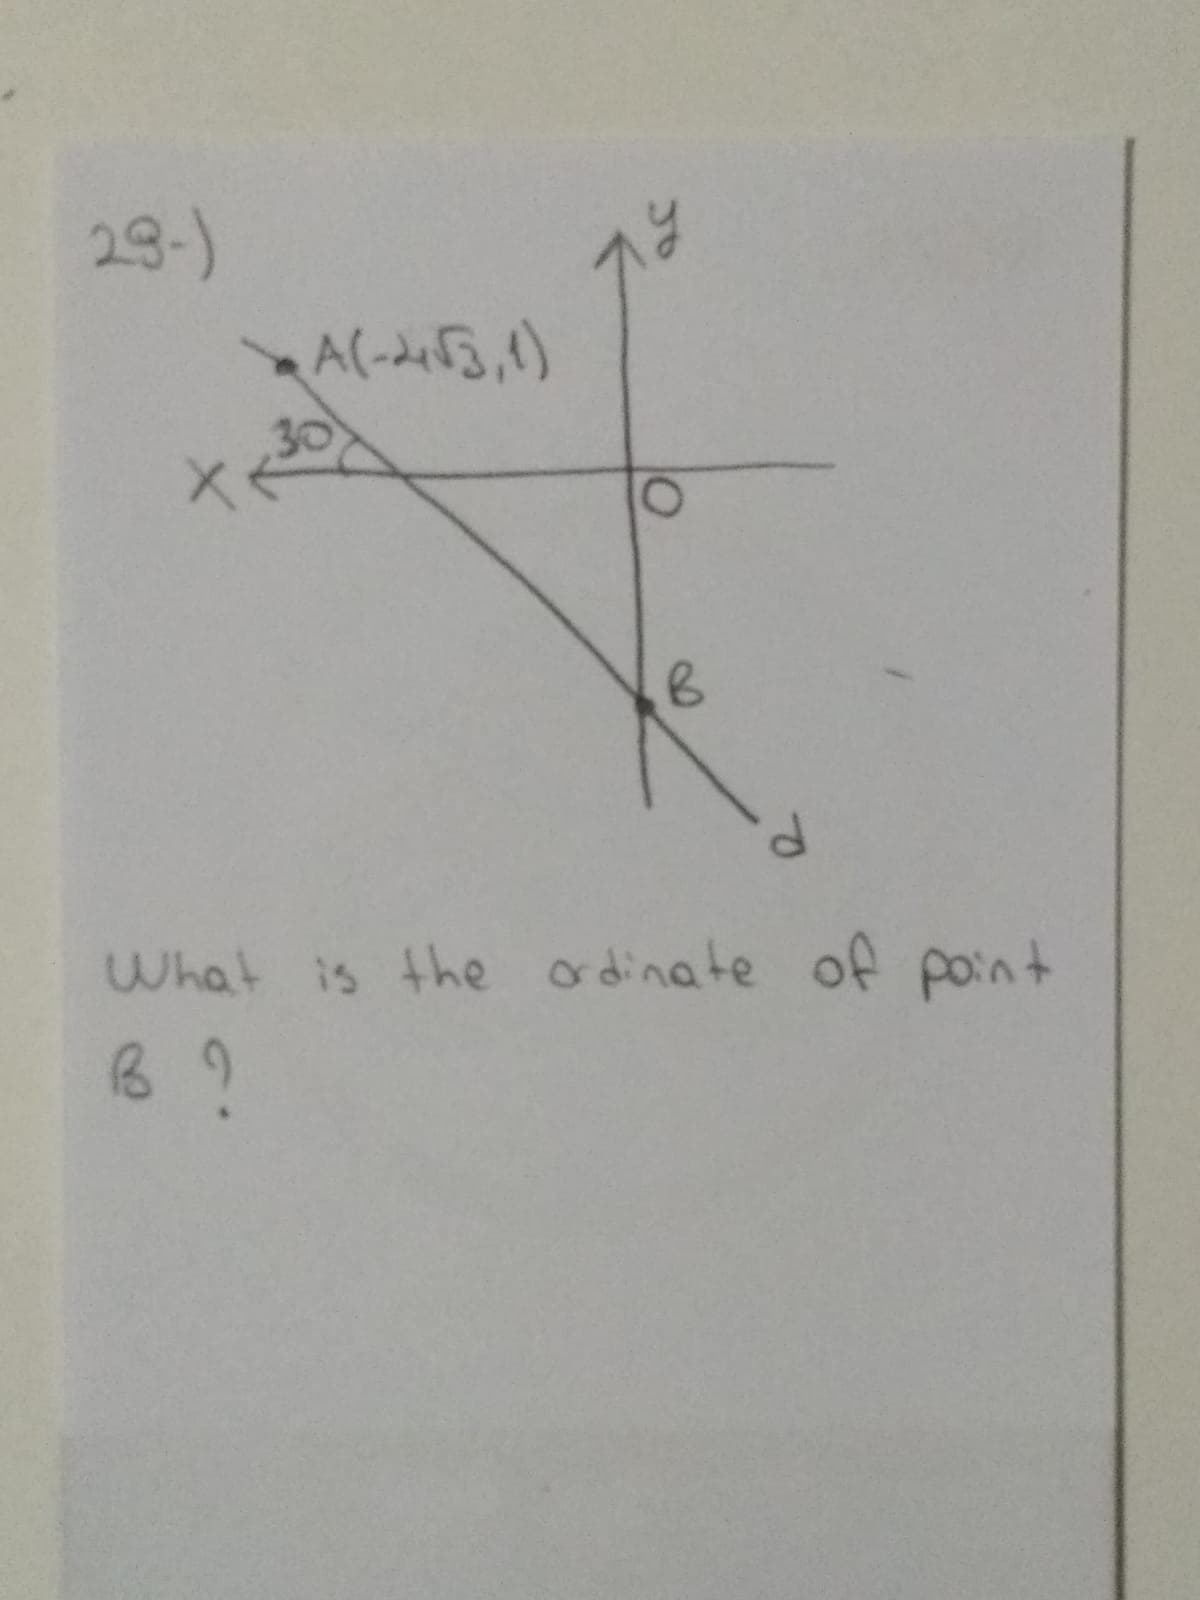 29-)
What is the odinate of point
